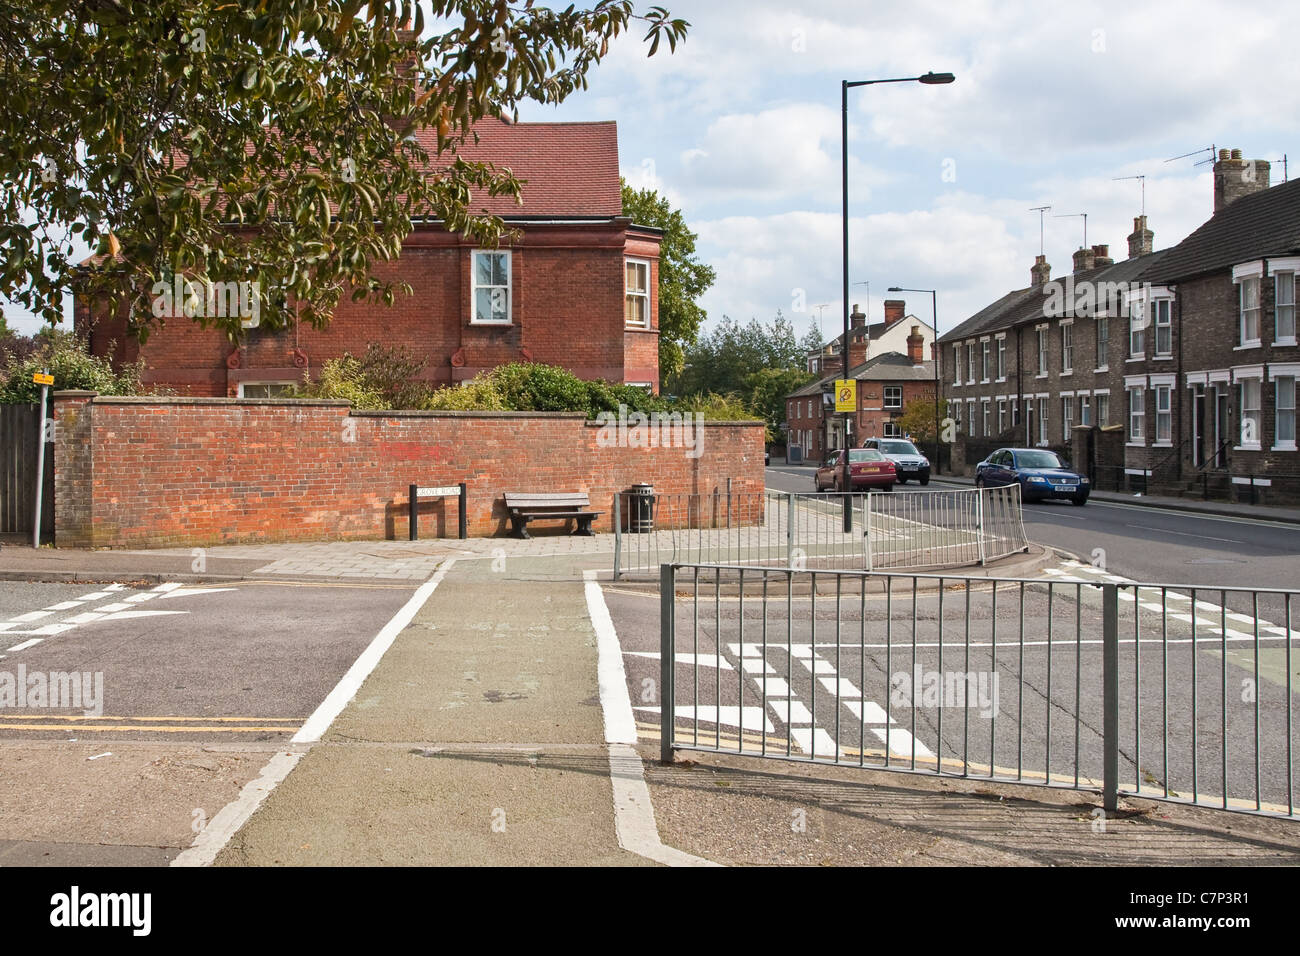 Pedestrian and cycle path crossing at a road junction in Bury St Edmunds, UK Stock Photo